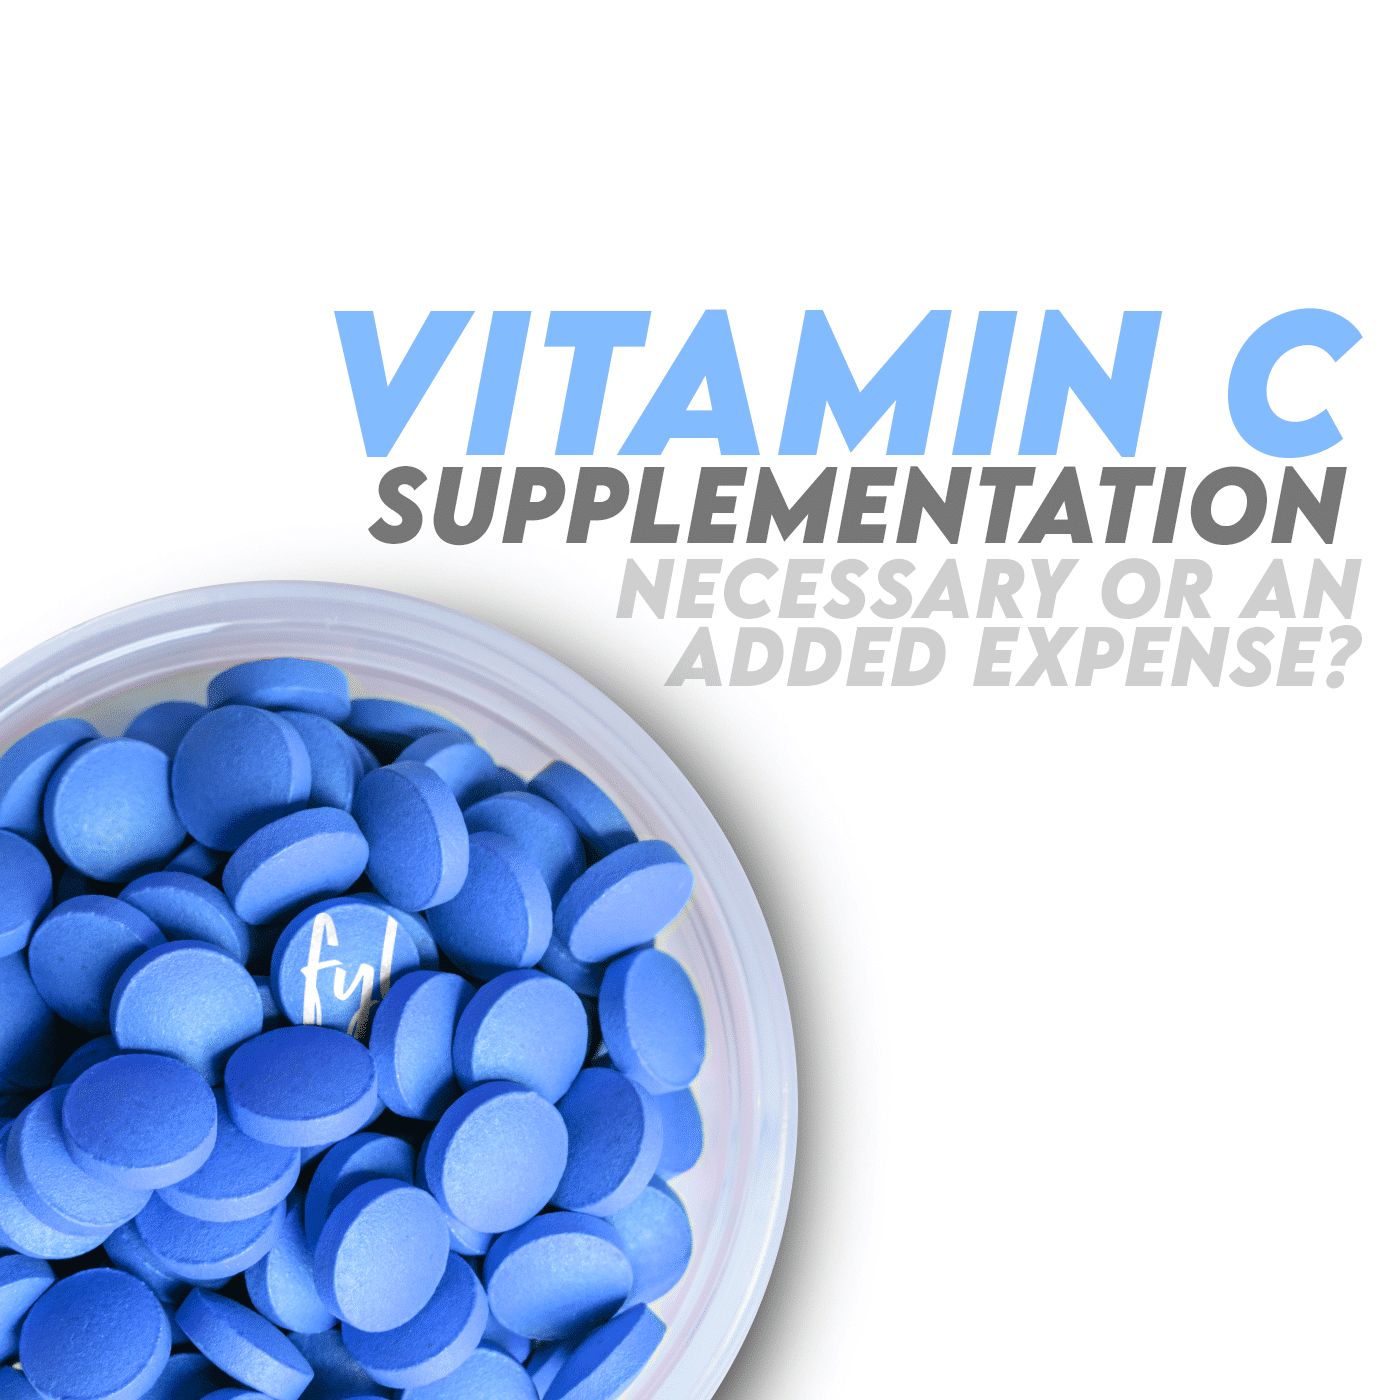 Vitamin C Supplementation – Necessary or Just An Added Expense?